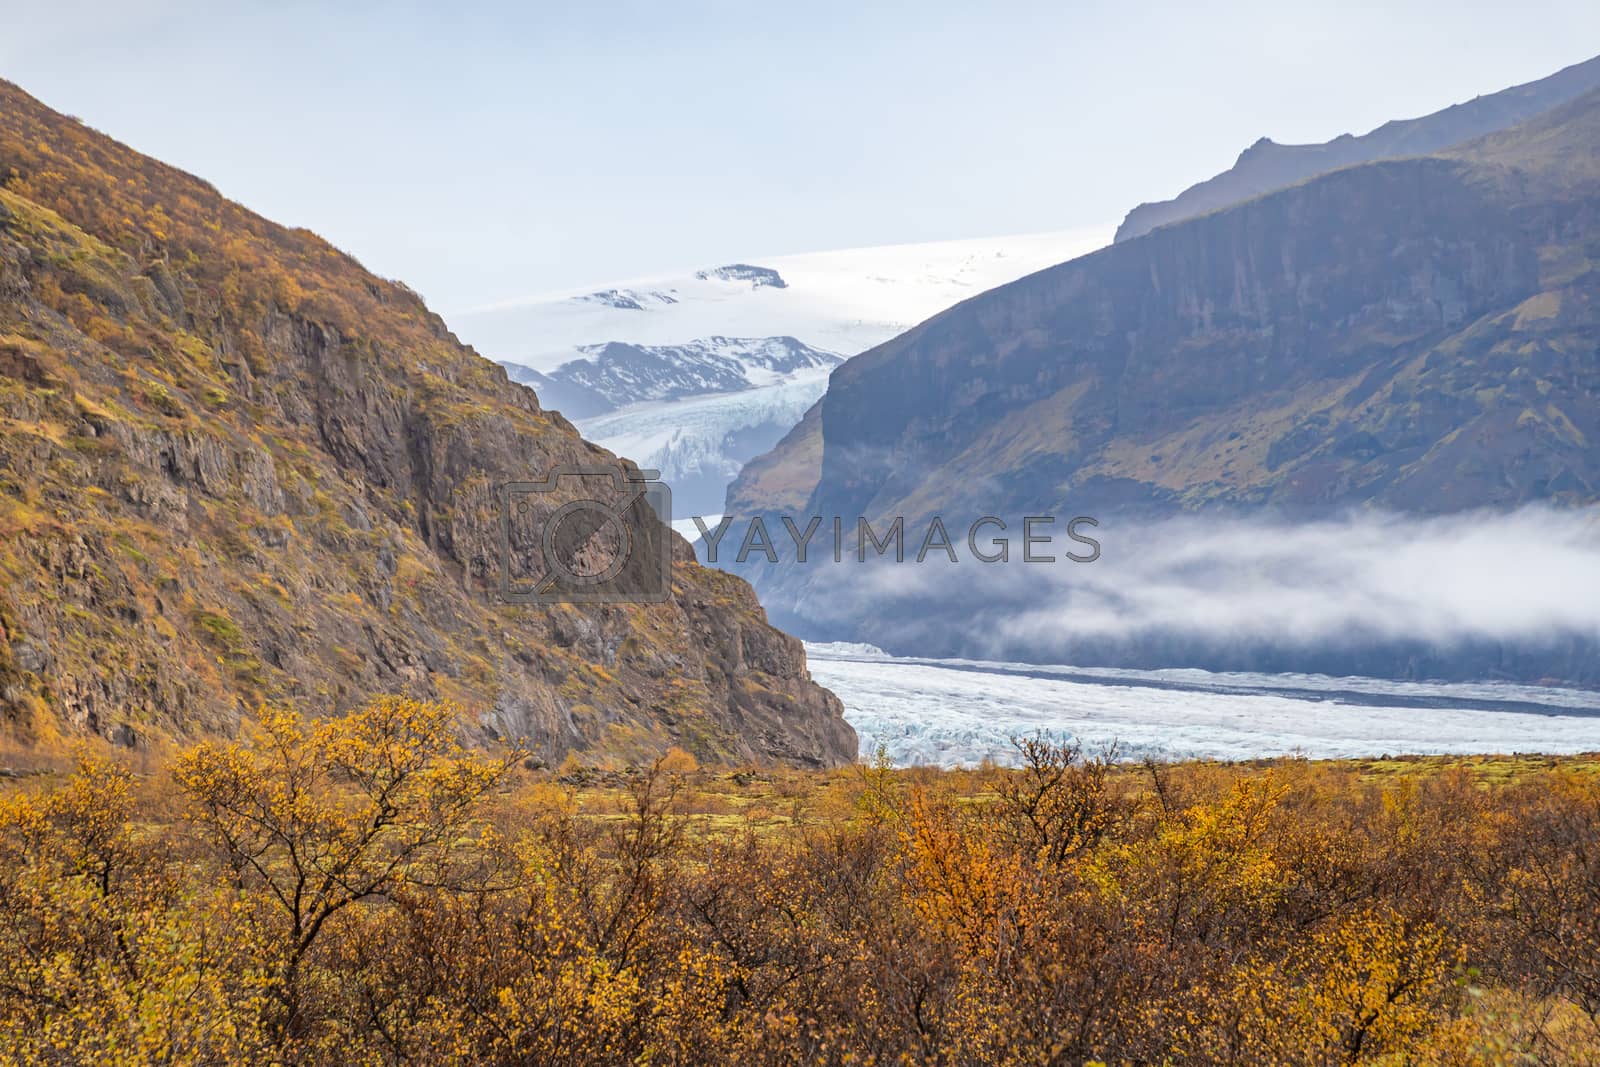 Royalty free image of Vatnajoekull glacier old ice pushing through canyon down the mountain behind small tress by MXW_Stock